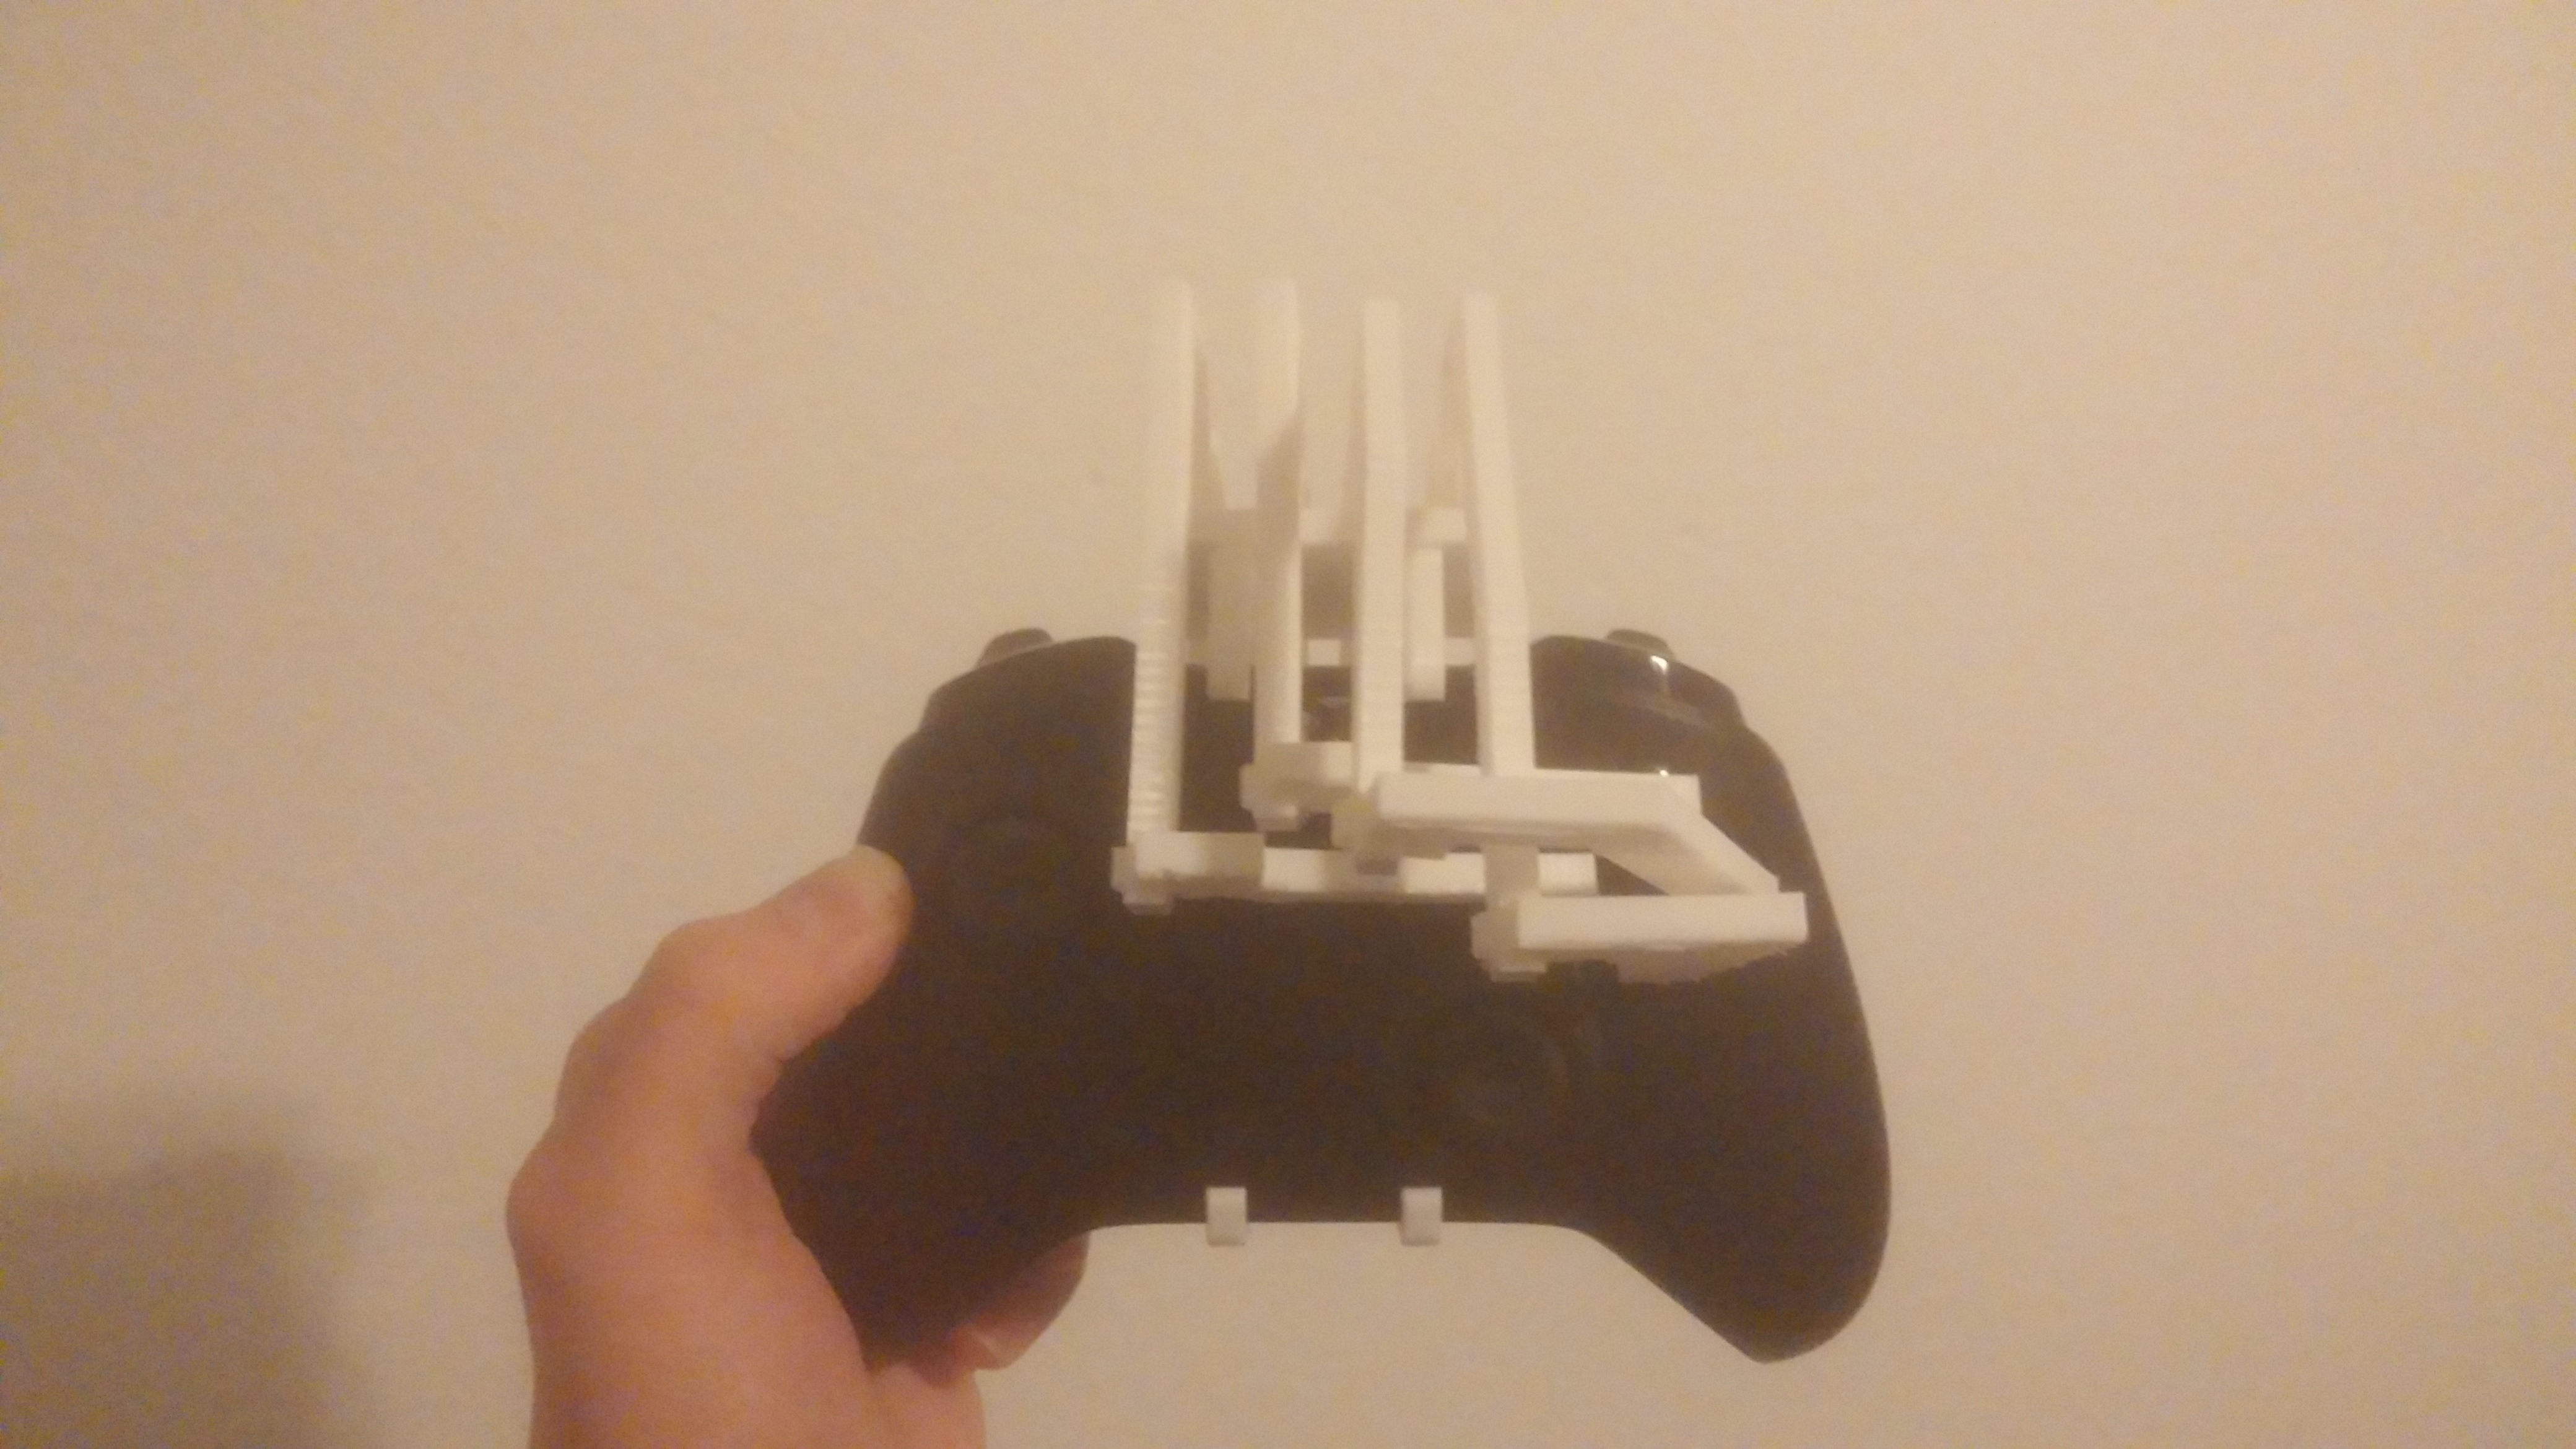 https://assets.pinshape.com/uploads/image/file/146284/xbox-one-controller-paddles-all-4-paddles-3d-printing-146284.jpg